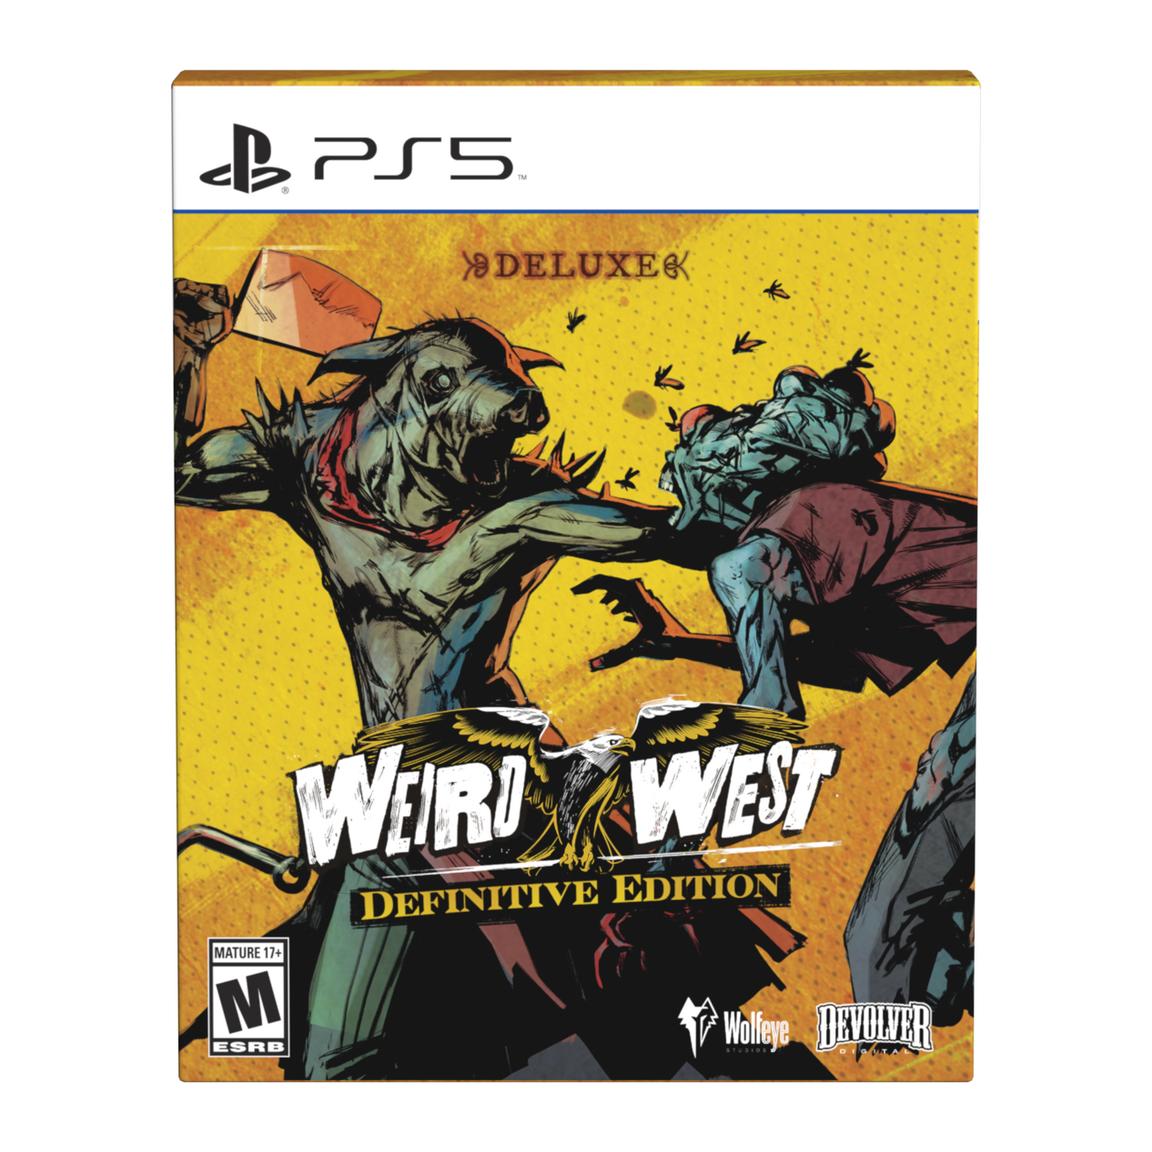 цена Видеоигра Weird West: Definitive Edition Deluxe - PlayStation 5